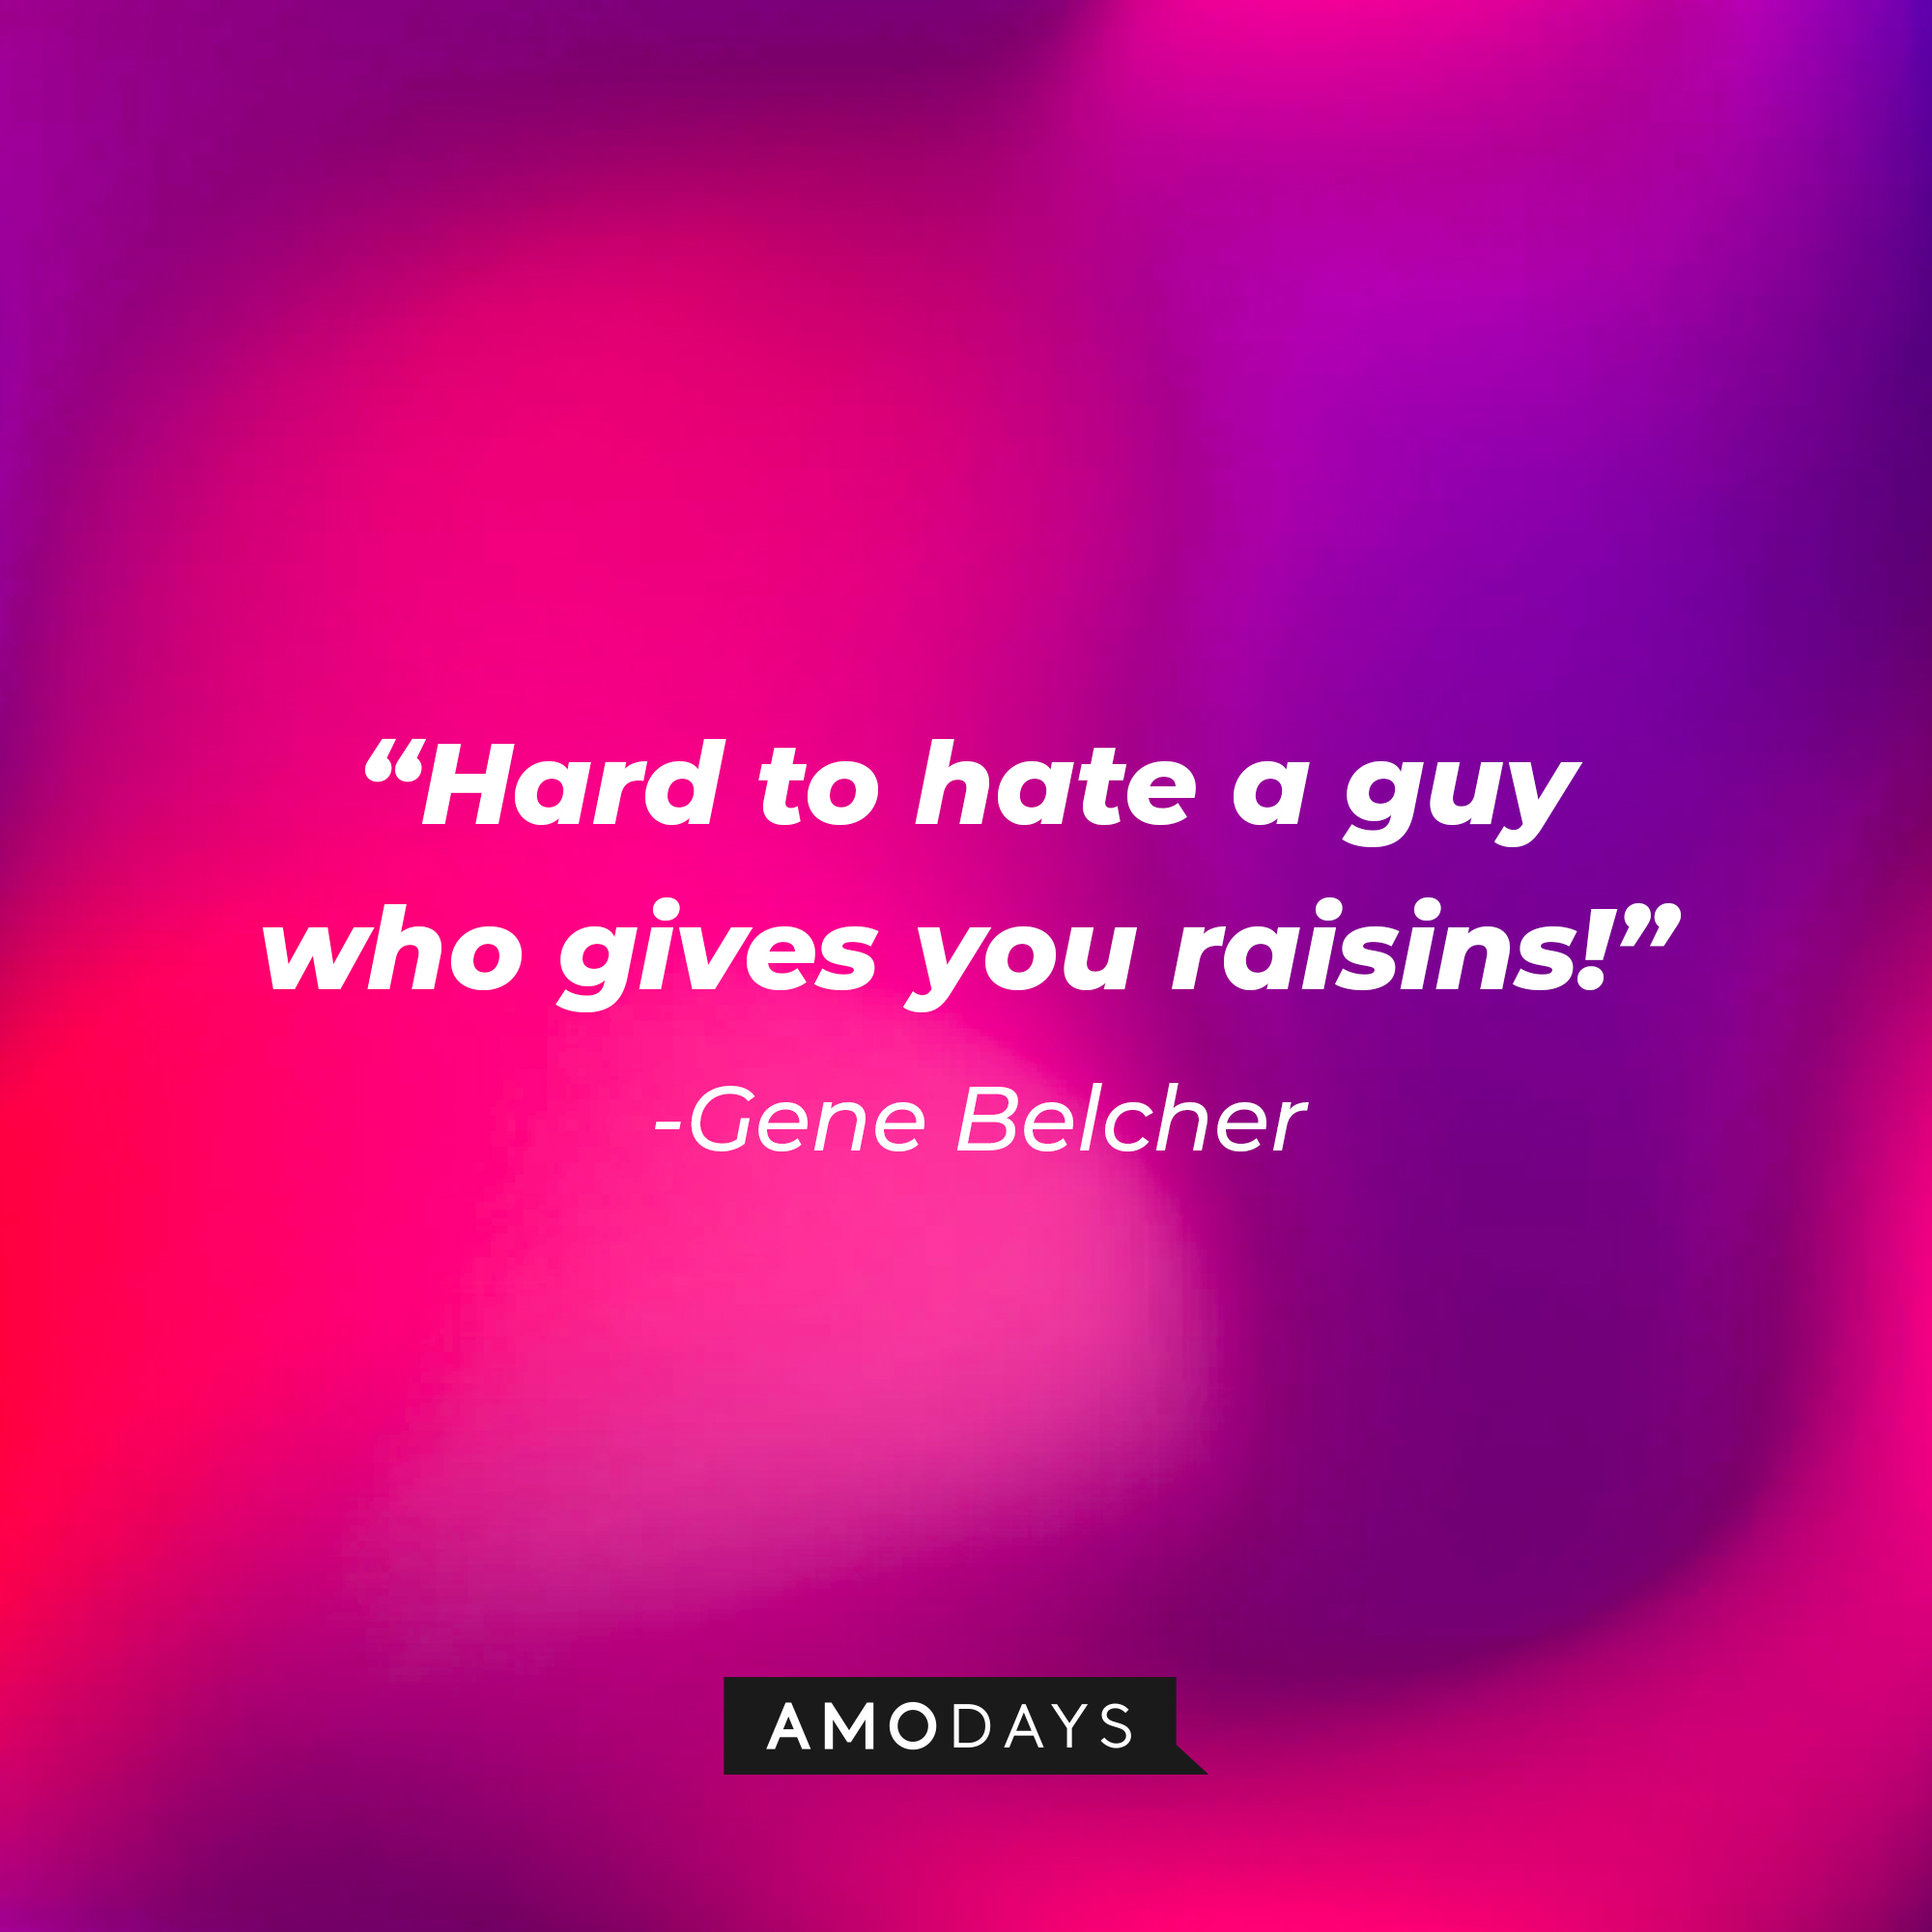 Gene Belcher's quote: "Hard to hate a guy who gives you raisins!" | Source: Amodays